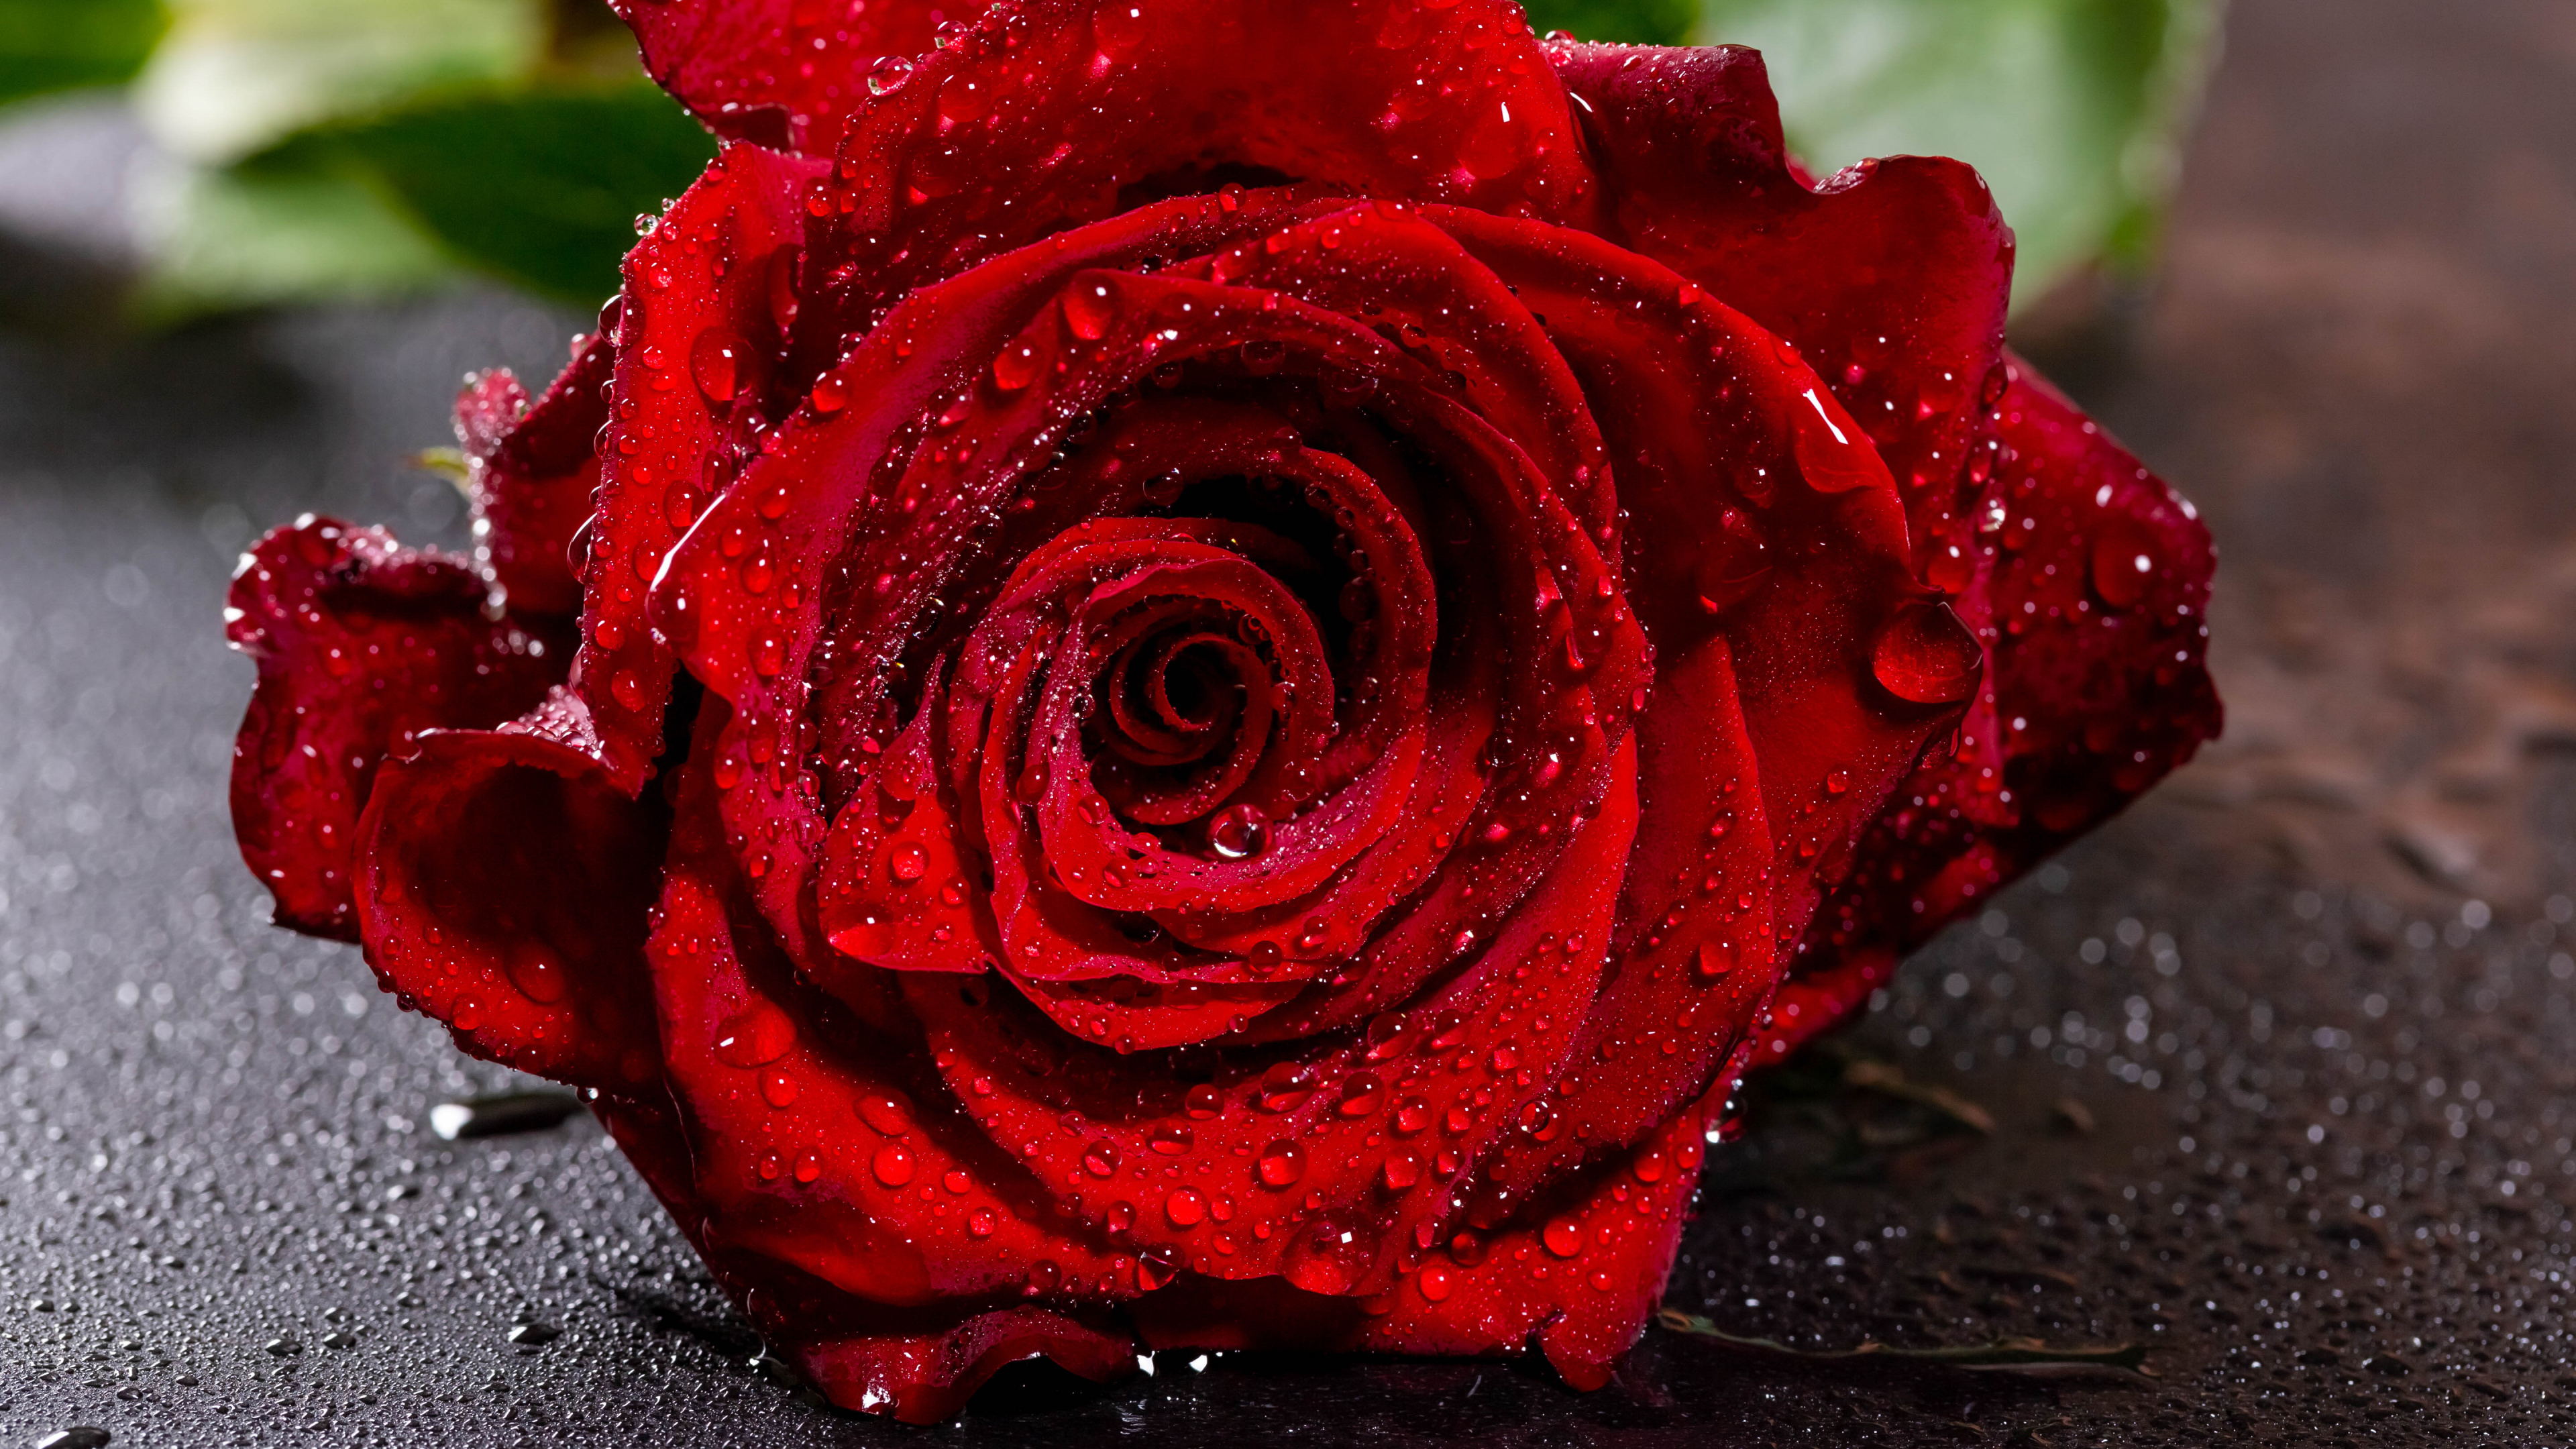 Red Rose on Black Surface. Wallpaper in 3840x2160 Resolution